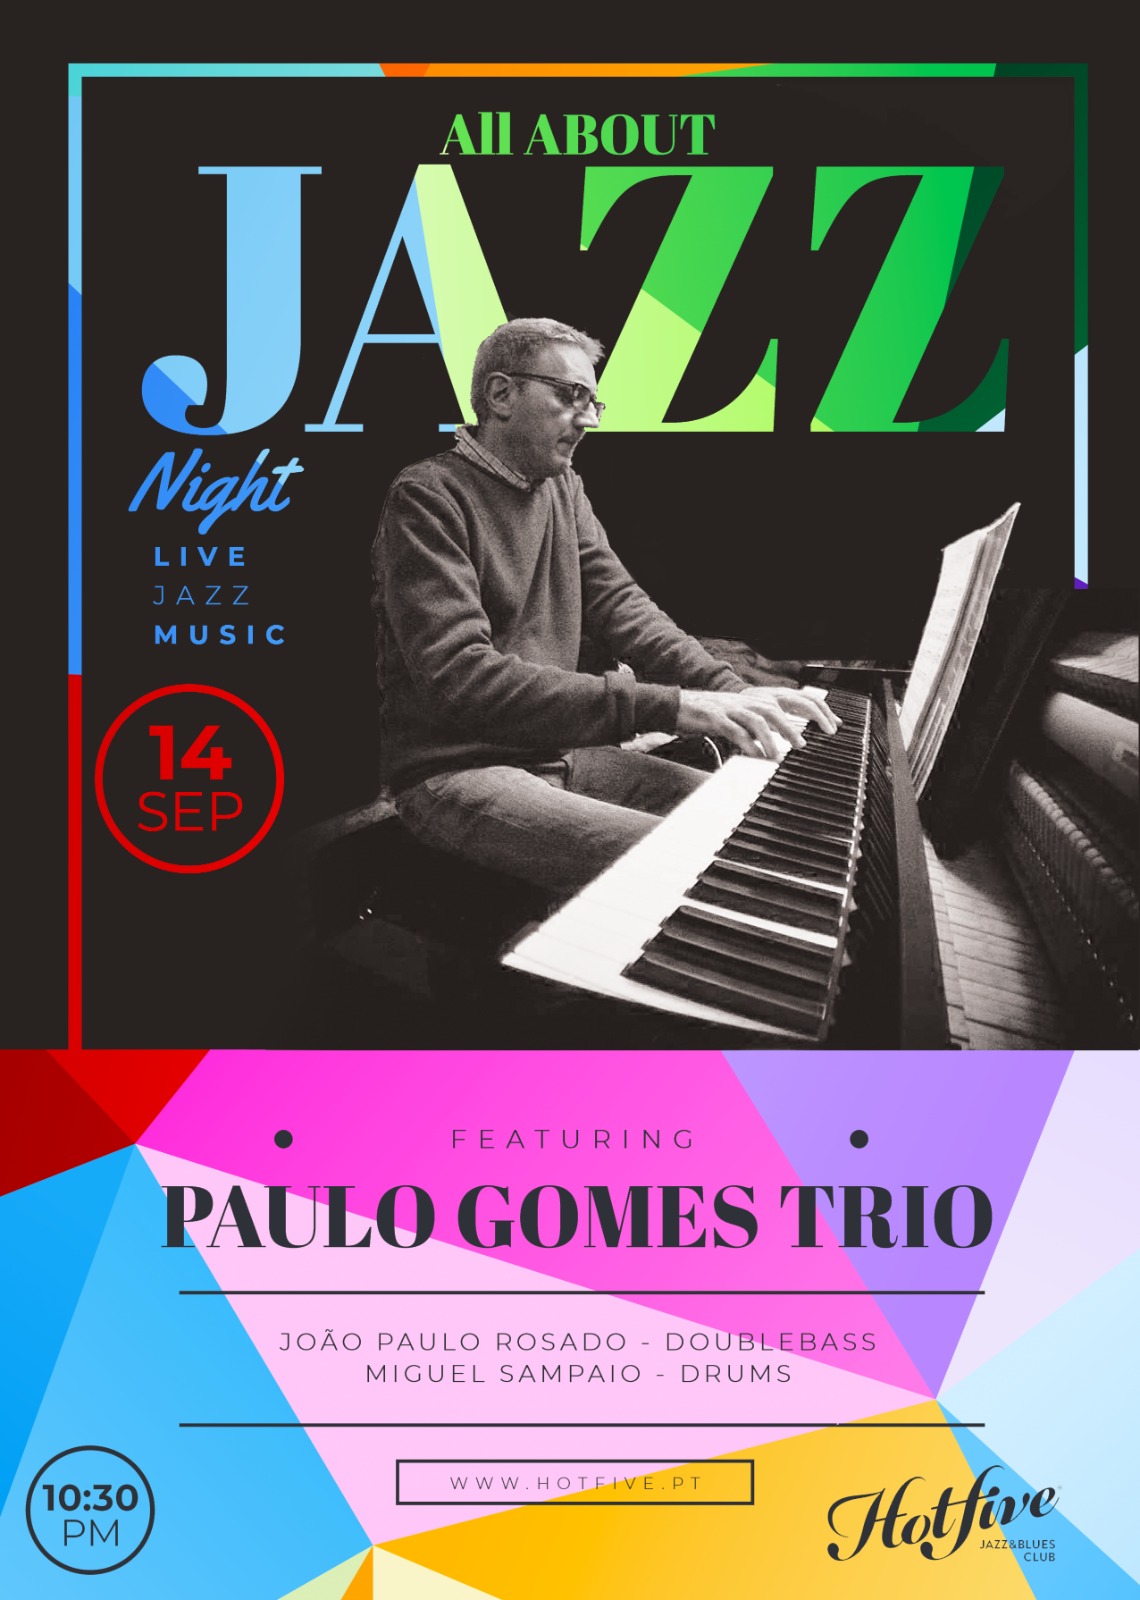 All about jazz - Paulo Gomes trio